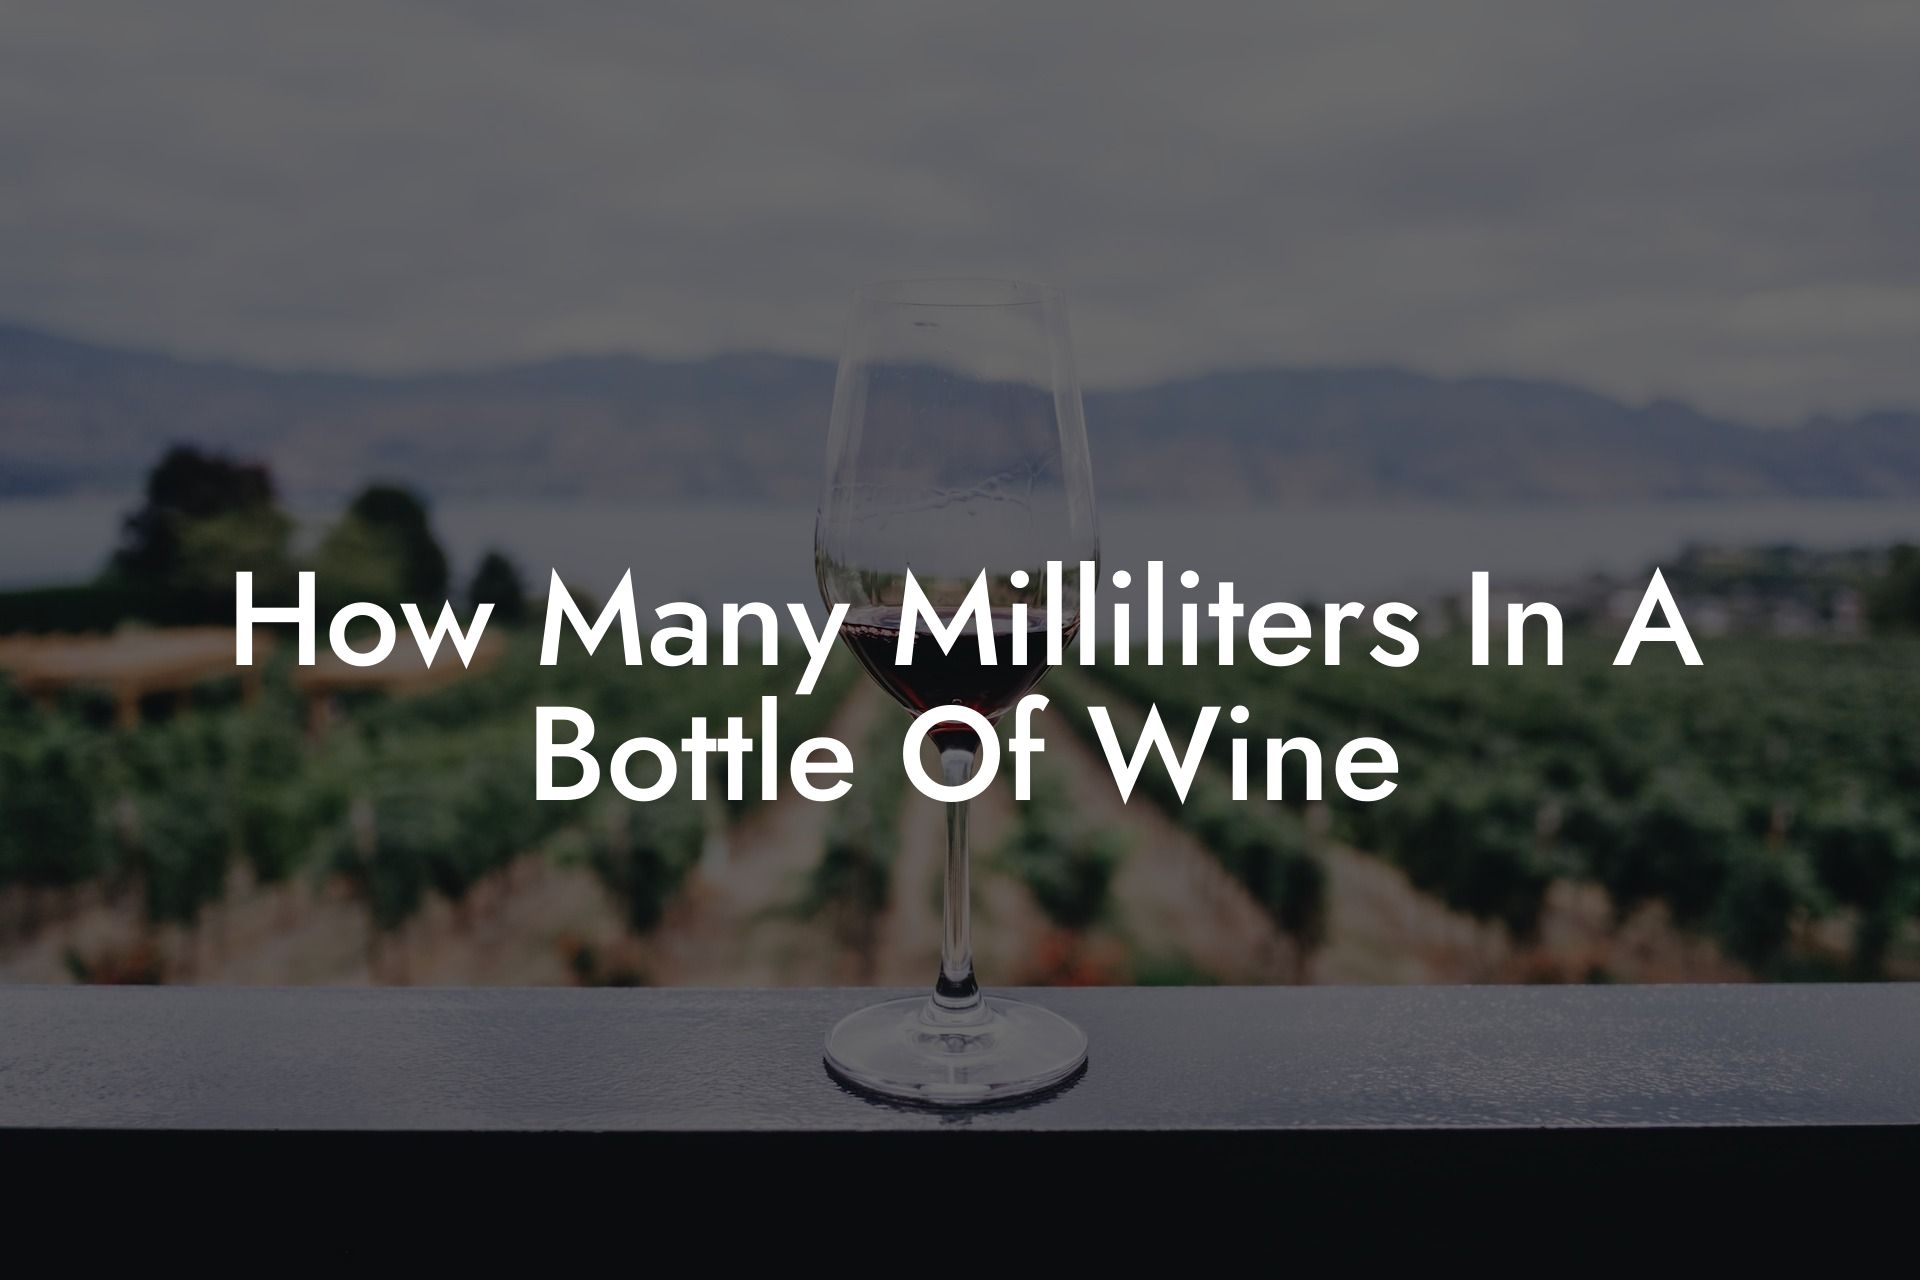 How Many Milliliters In A Bottle Of Wine